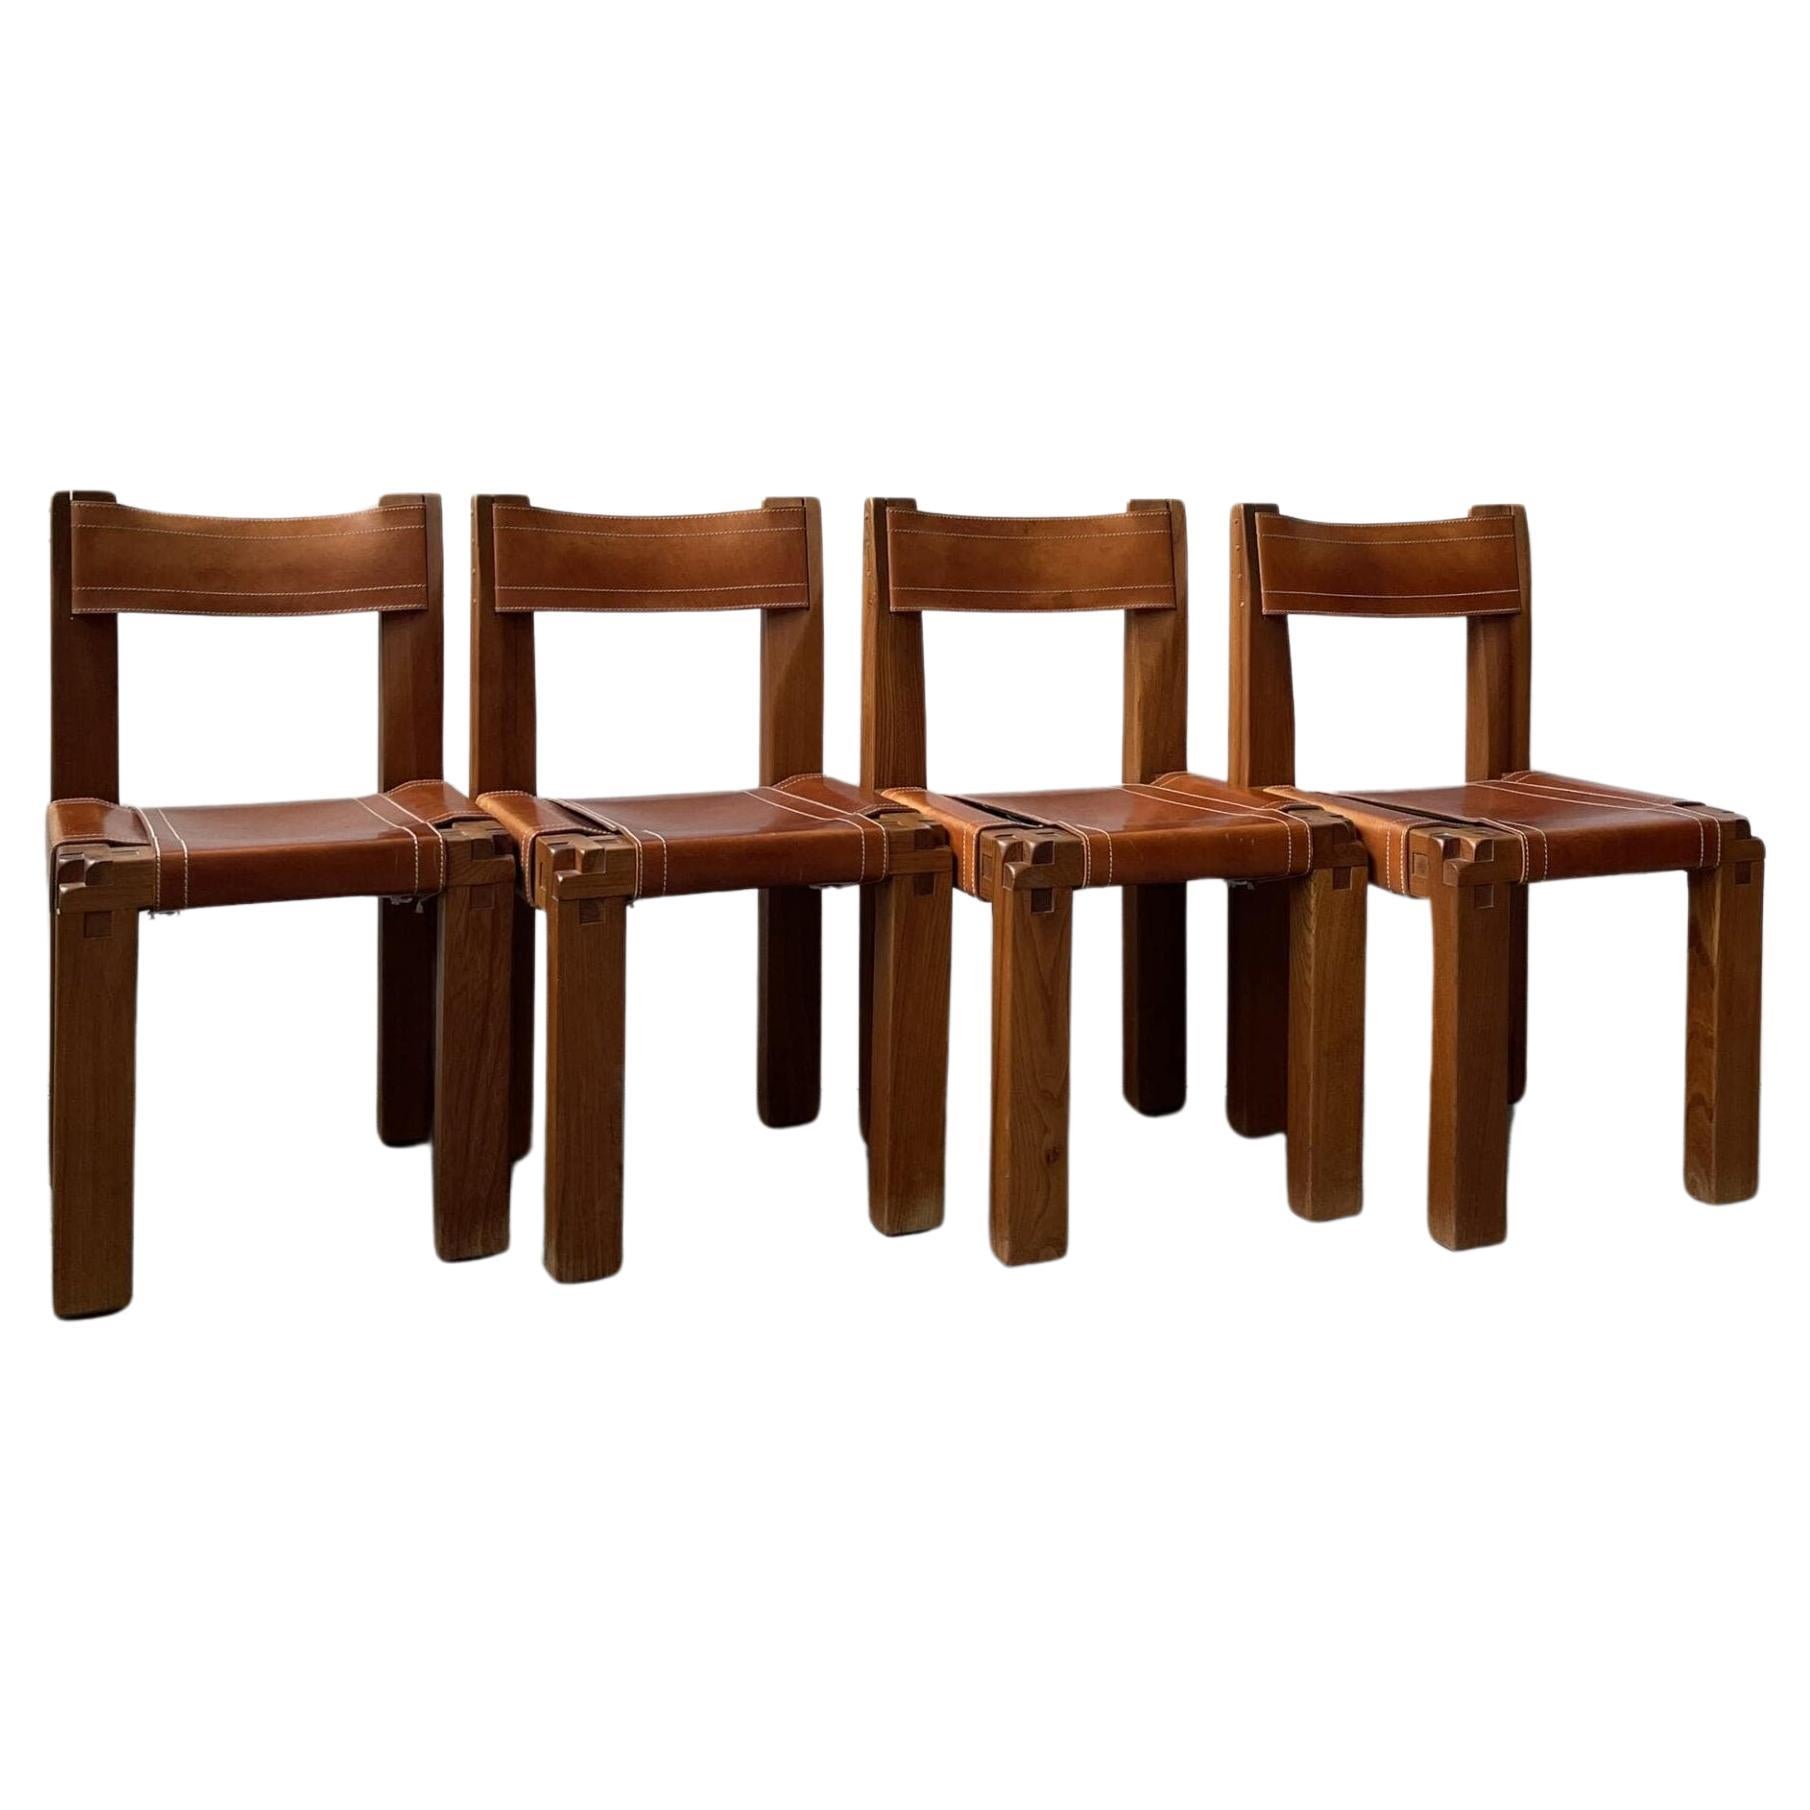 Set of 2 Pierre Chapo S11 Chairs - 2 Remaining